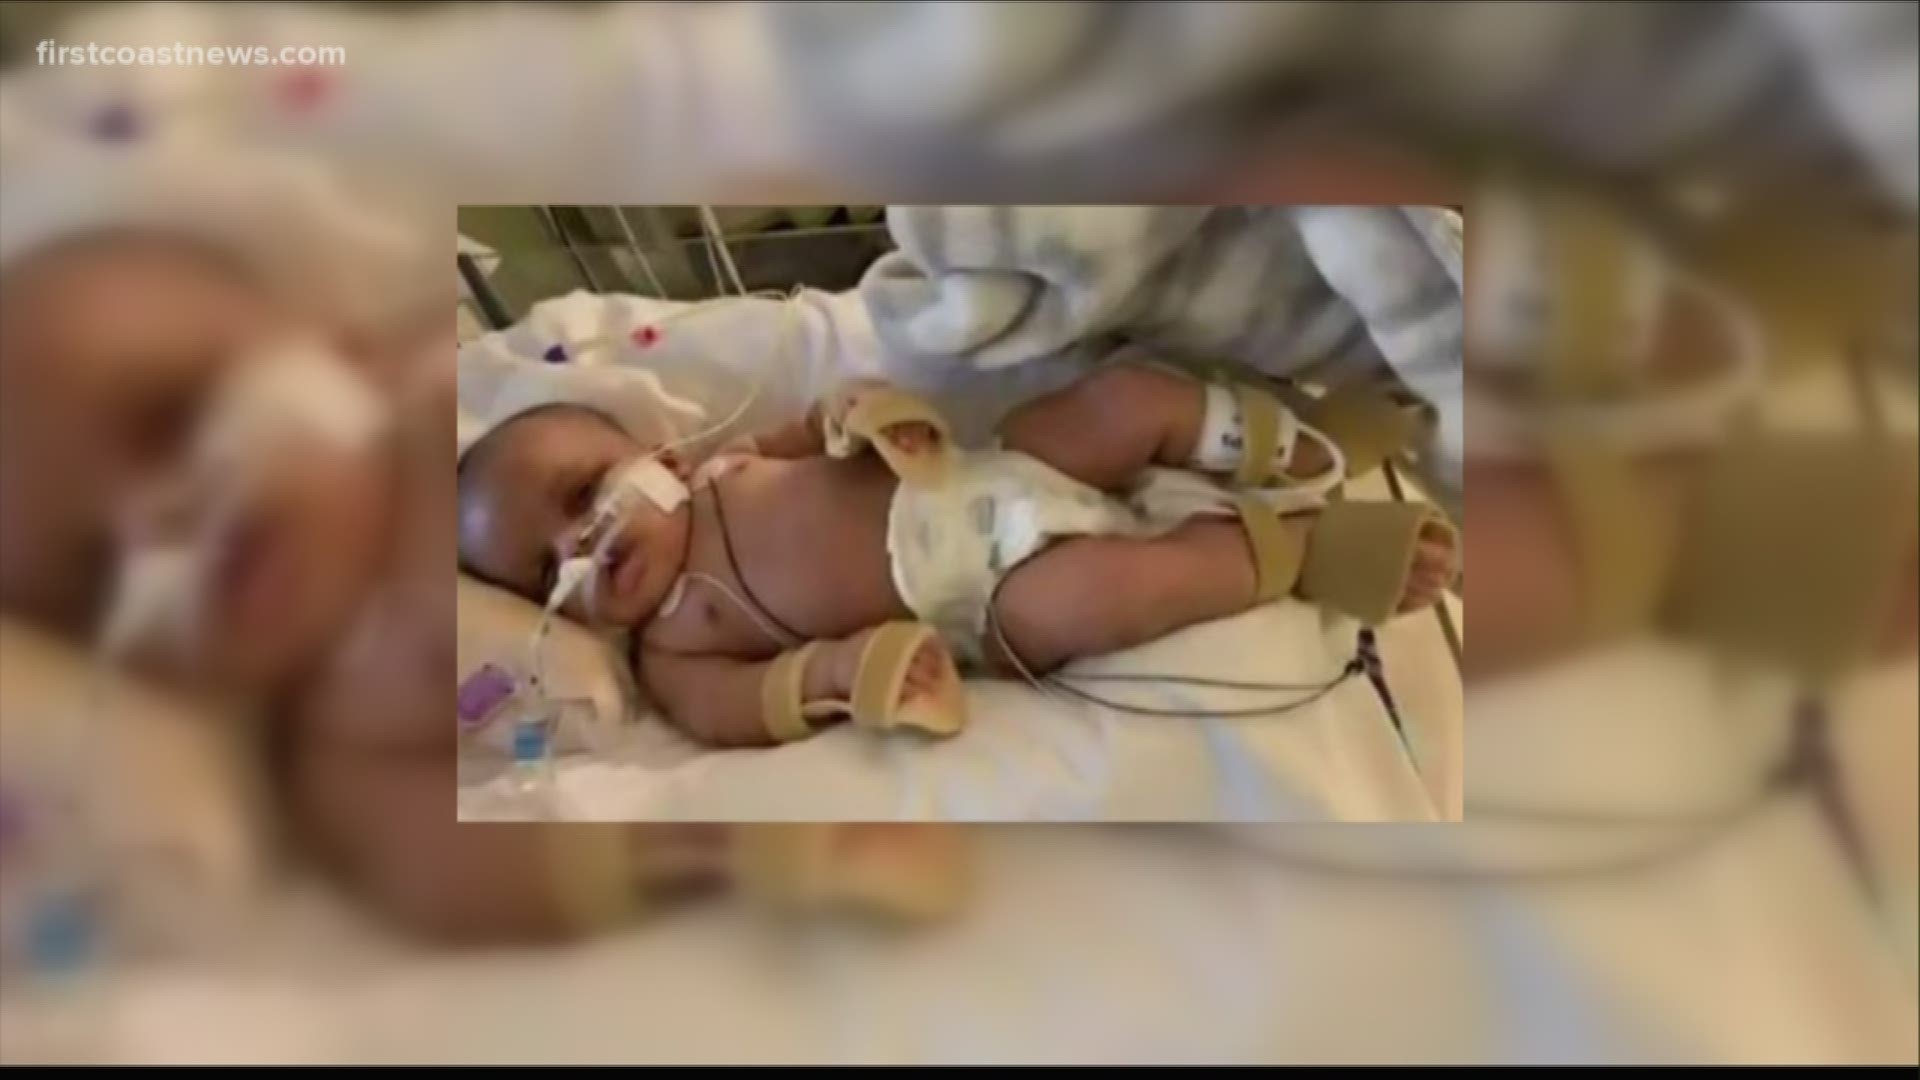 The family of Iyana McGraw tells First Coast News the infant, Milan, was taken off breathing tubes Sunday.